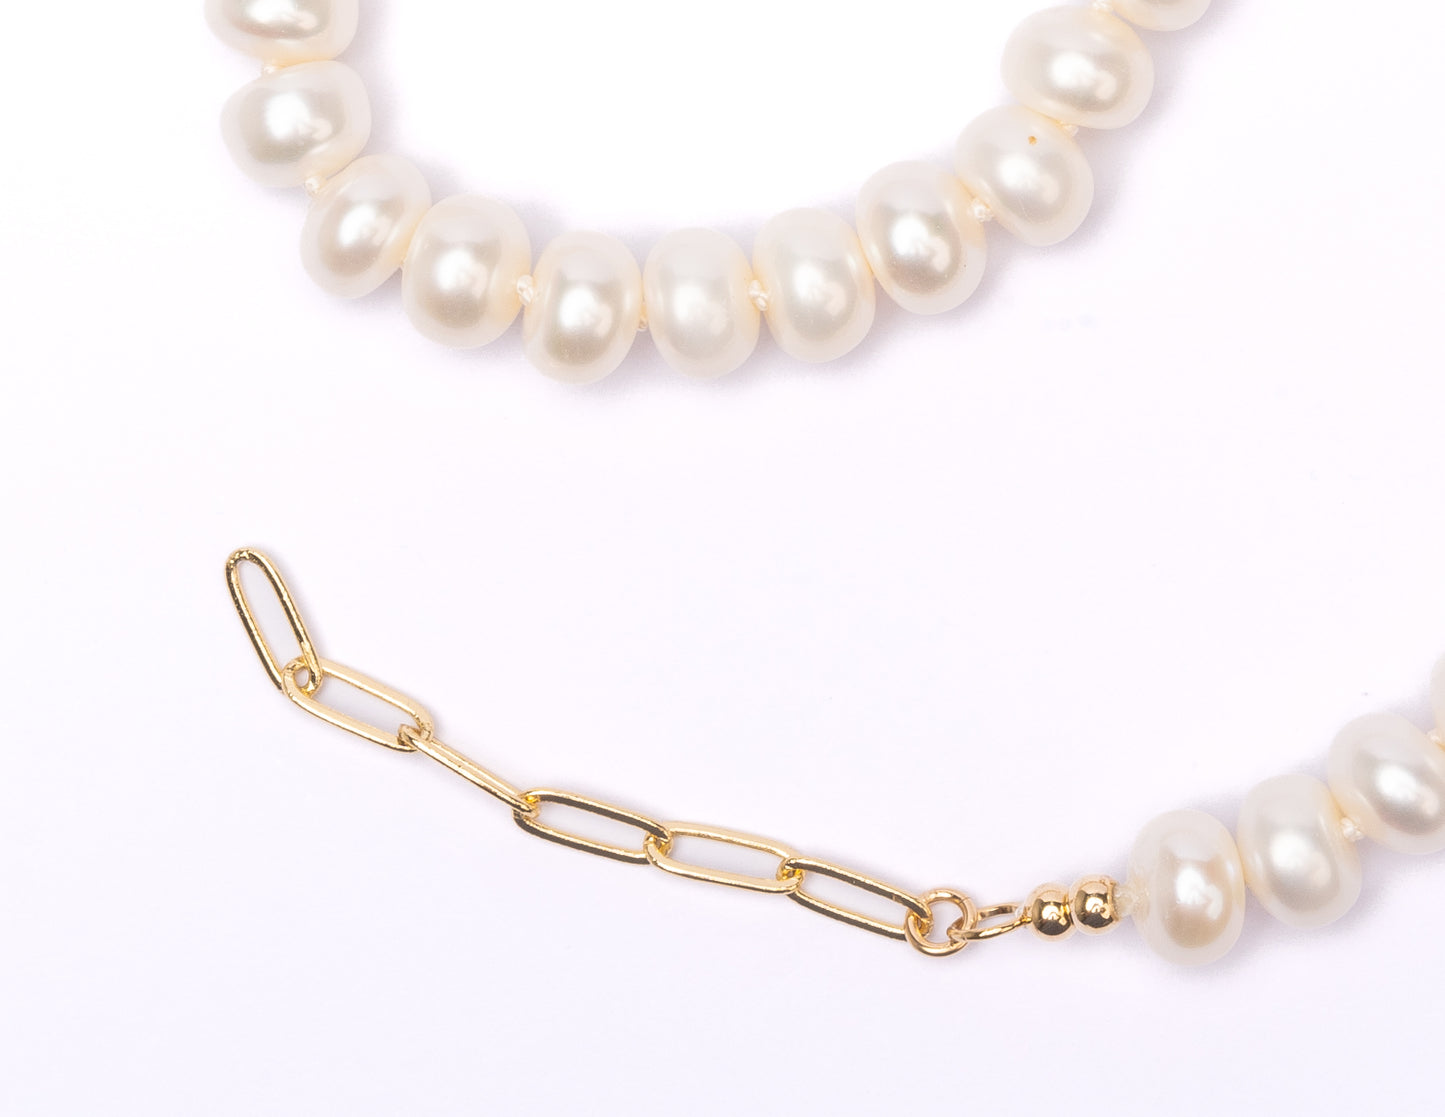 Freshwater Pearl Candy Necklace